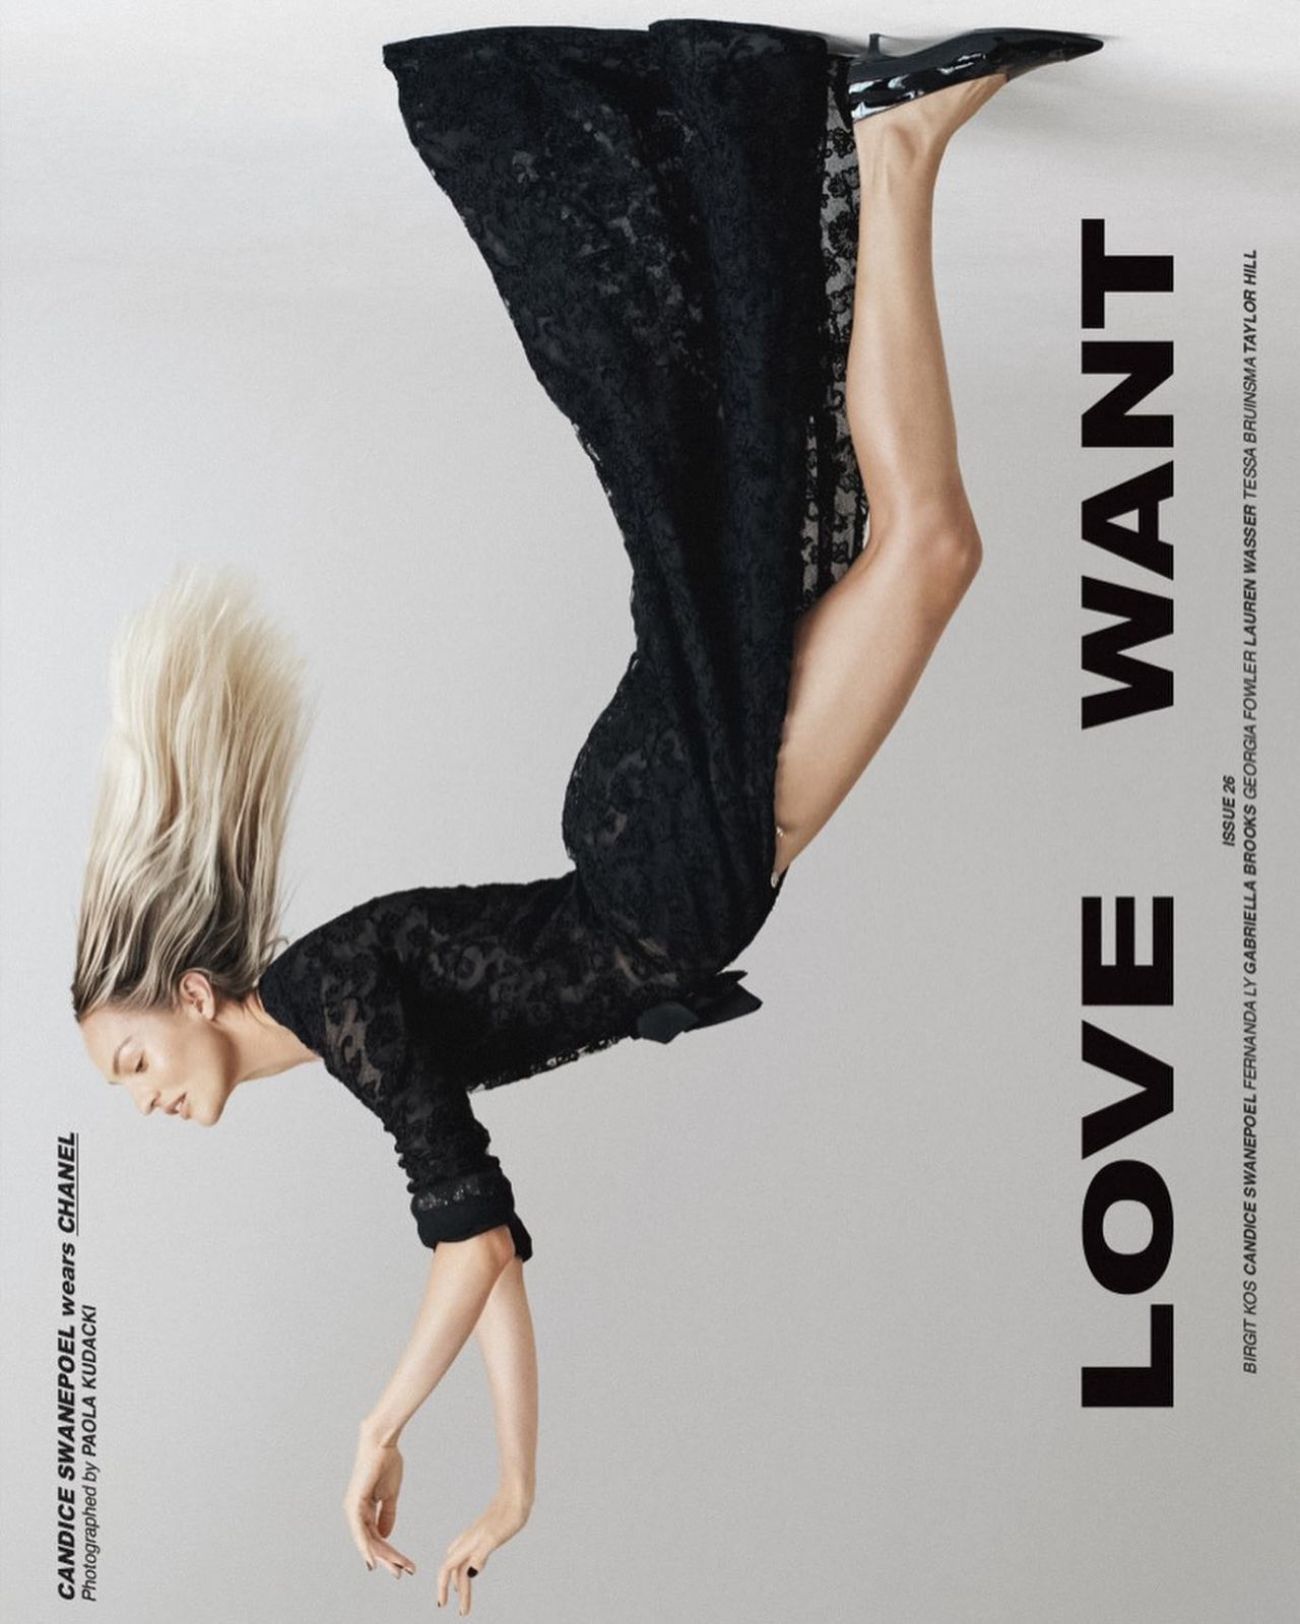 Candice Swanepoel Covers Love Want Magazine Fall-Winter 2022